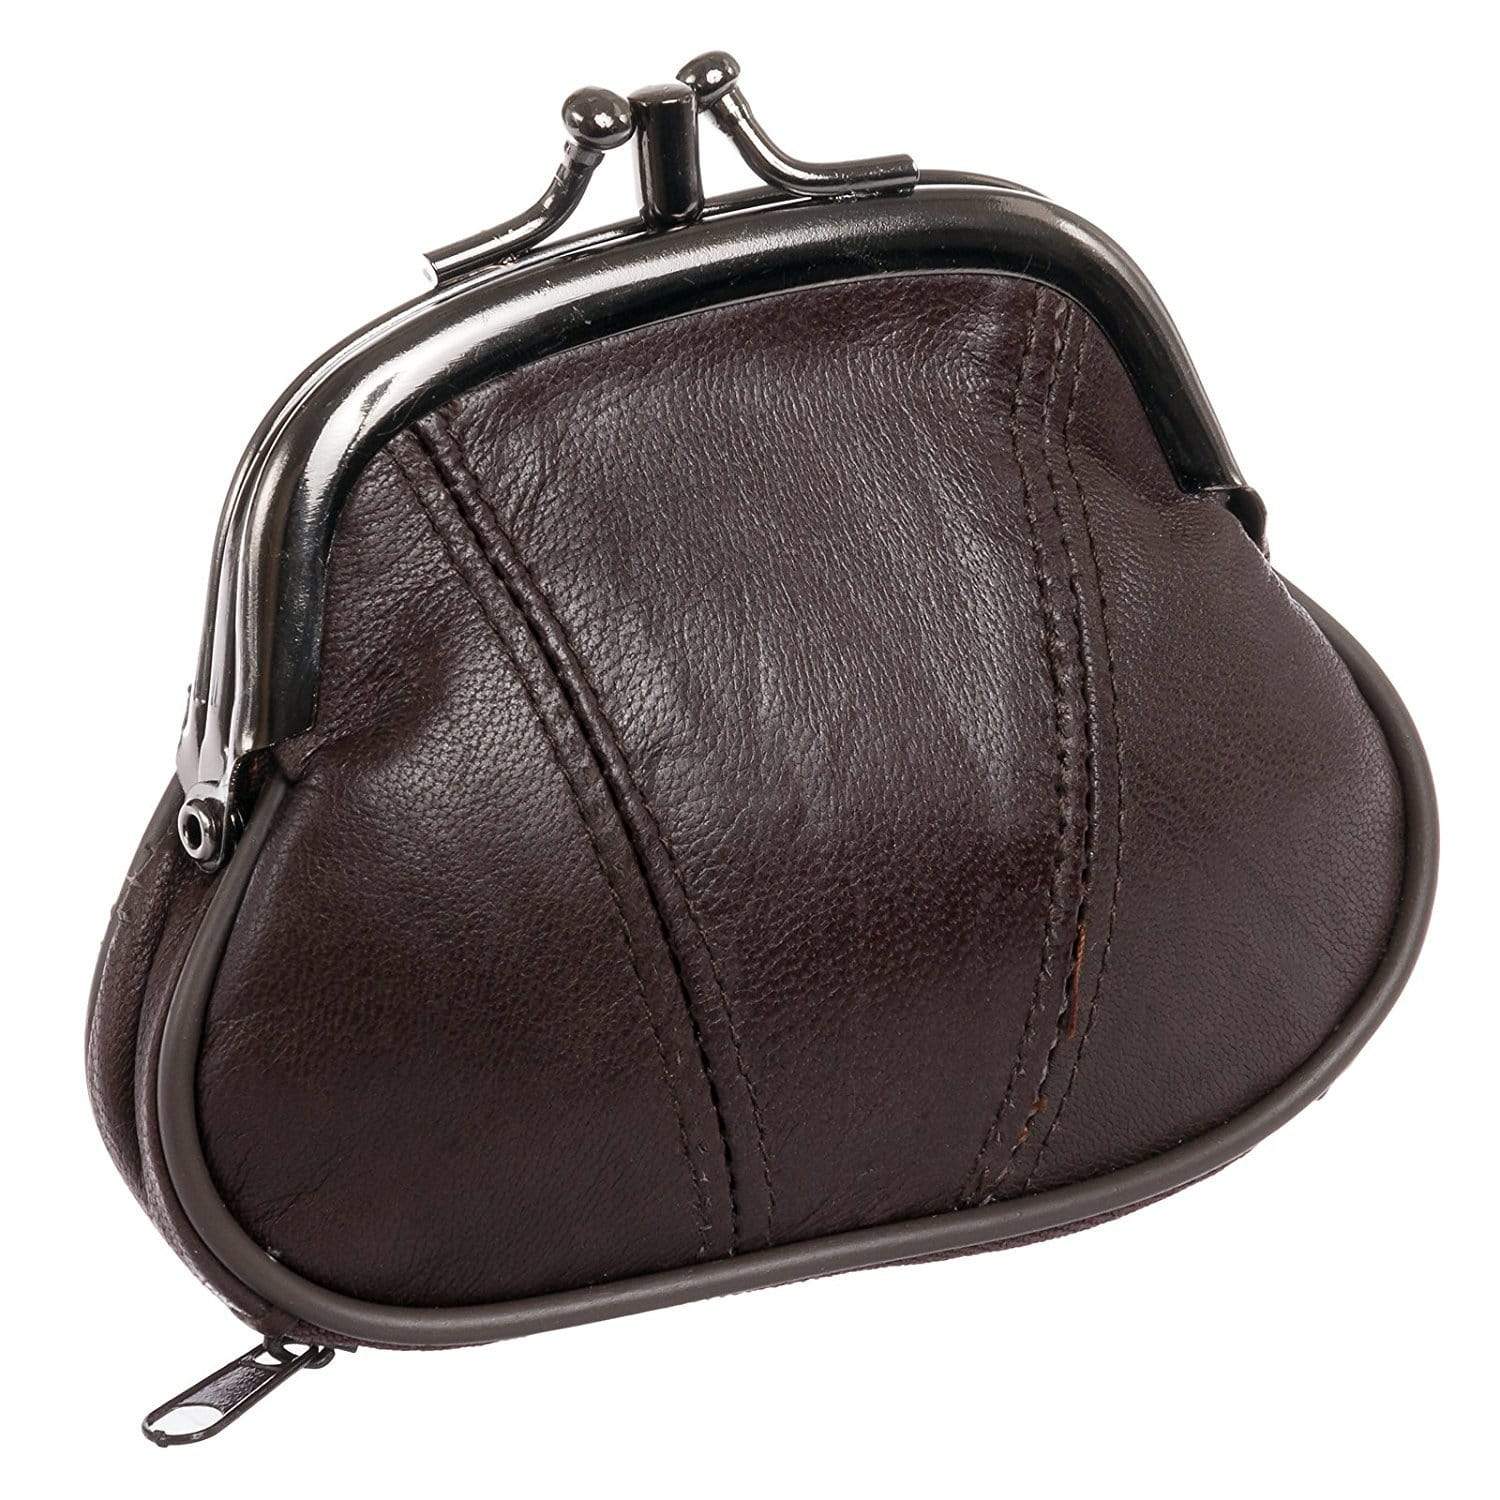 KISSLOCK Leather Change Purse with Clasp and zipper bottom pouch